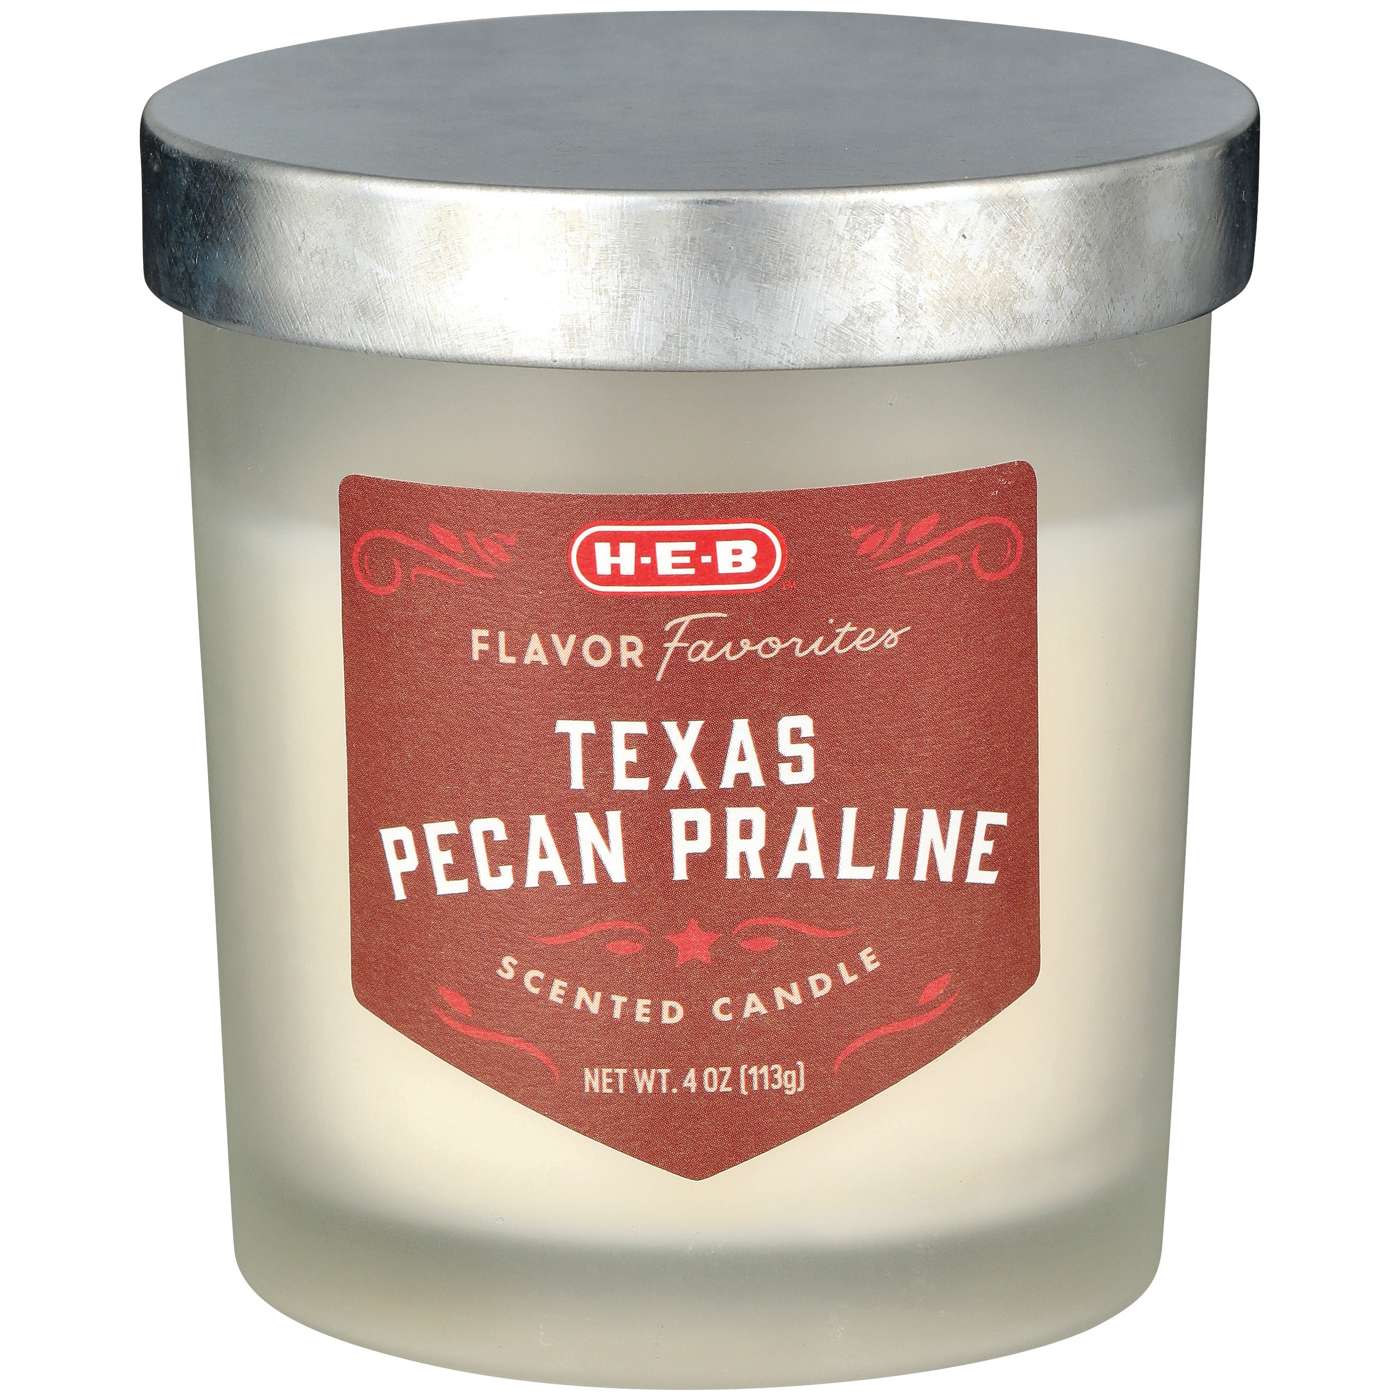 H-E-B Flavor Favorites Texas Pecan Pralines Scented Candle; image 2 of 2